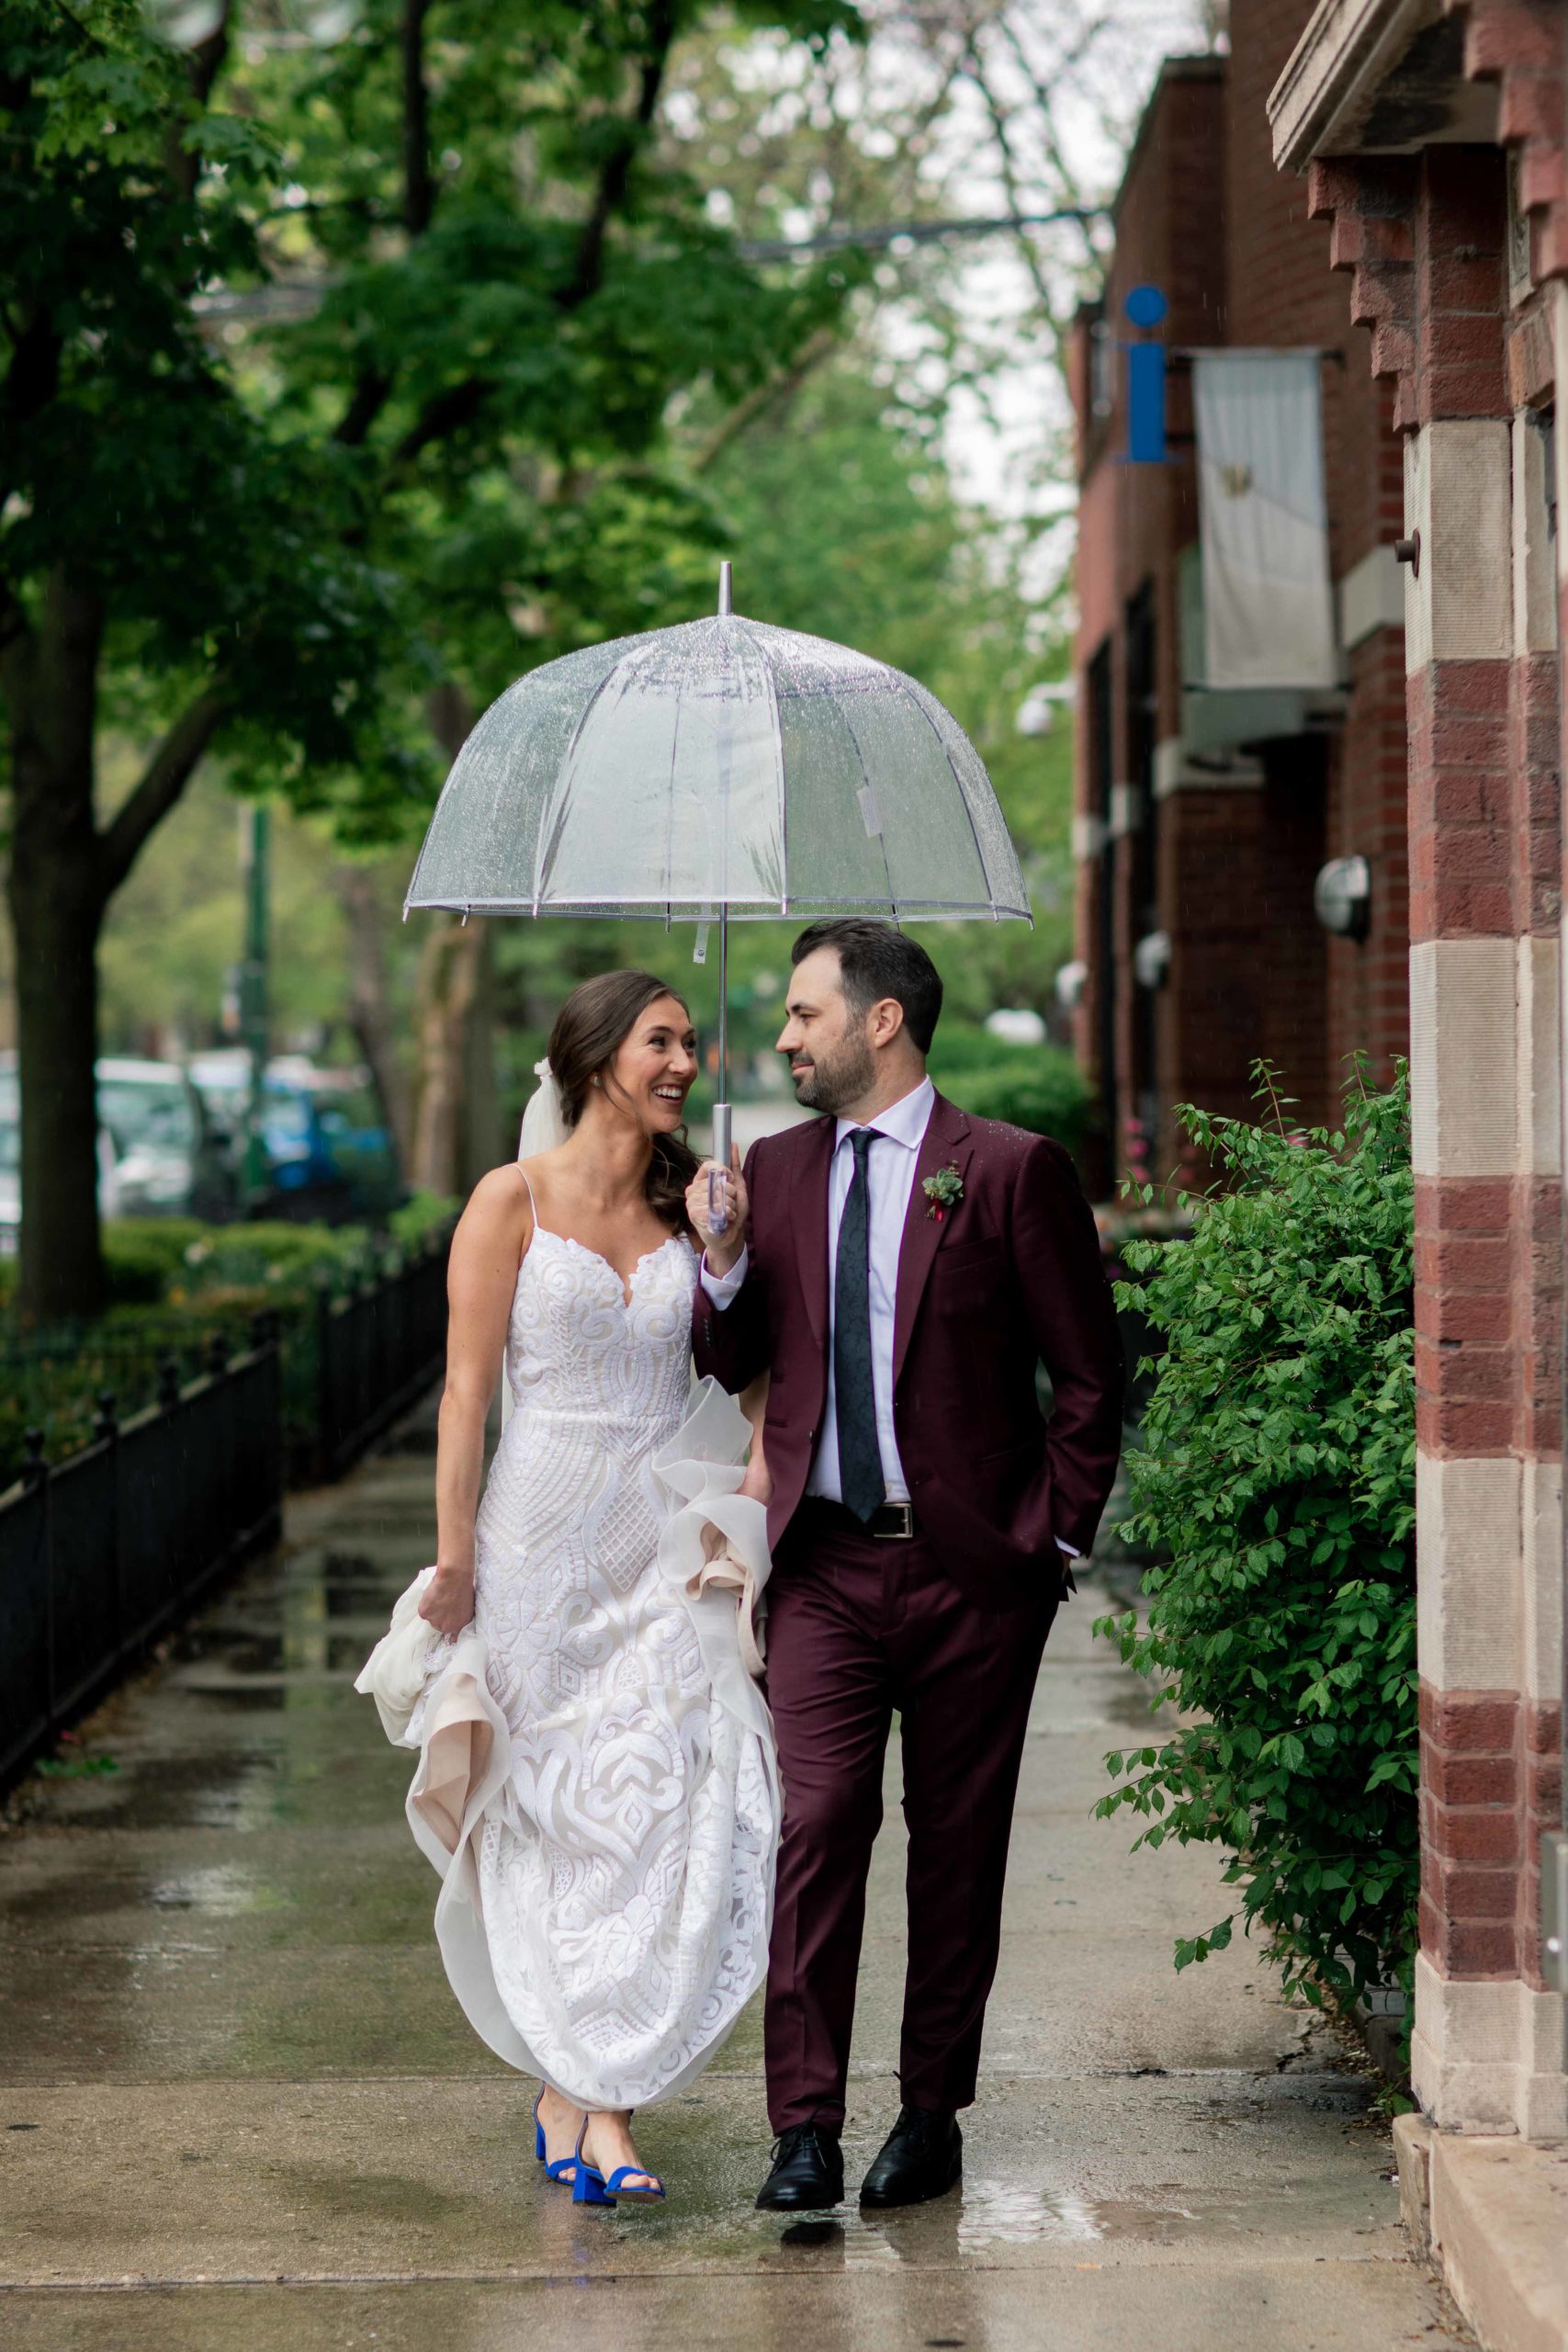 Chicago Illinois Wedding Photography Bride and Groom in the rain with clear umbrella